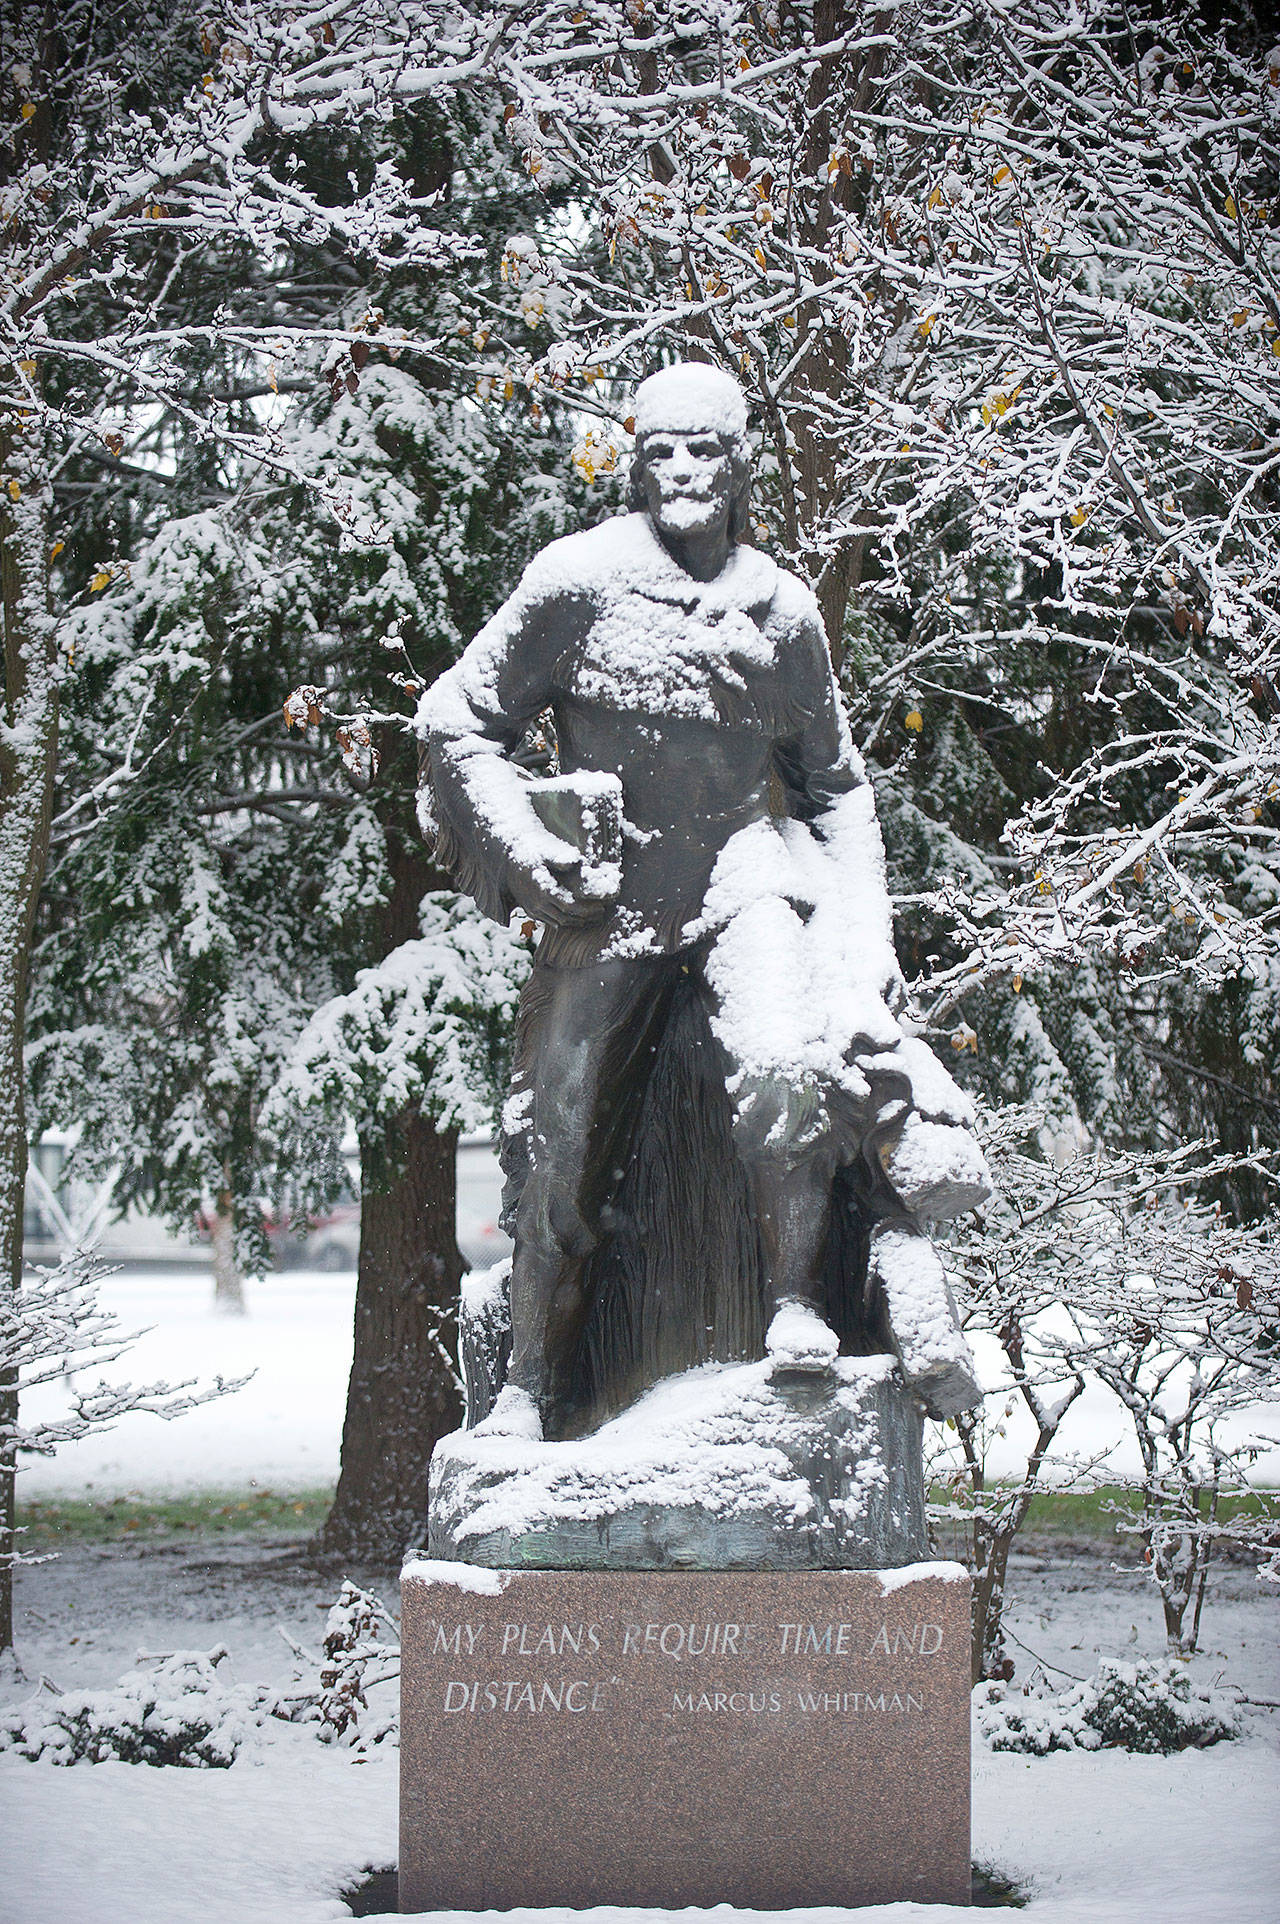 A dusting of snow sits on the statue of Marcus Whitman in Walla Walla in December 2016. The past year has seen the continued reappraisal of Whitman, whose actions are now viewed by many as imperialistic and destructive, and the Washington Legislature voted to remove a similar statue of Whitman from Statuary Hall in Washington, D.C. (Walla Walla Union-Bulletin / via Associated Press)